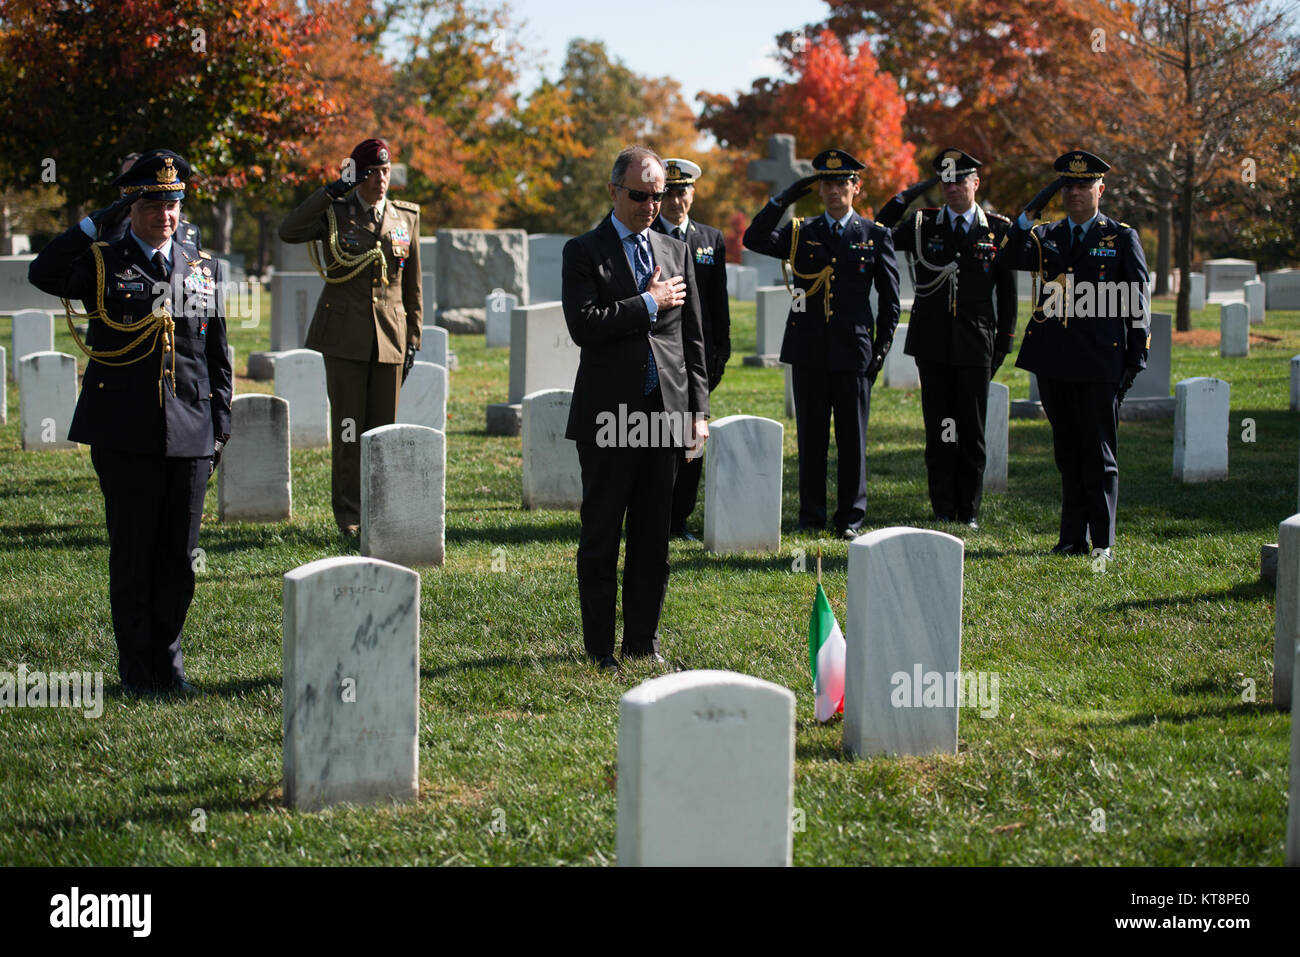 Armando Varricchio, center, Ambassador of Italy to the United States, and Maj. Gen. Luca Goretti, left, Italian Defense Attaché to the Italian Embassy, render honors after placing an Italian flag on the gravesites of Mario Batista and Cpl. Arcangelo Prudenza in Arlington National Cemetery, Nov. 4, 2016, in Arlington, Va. Varricchio also laid a wreath at the Tomb of the Unknown Soldier. (U.S. Army photo by Rachel Larue/Arlington National Cemetery/released) Stock Photo